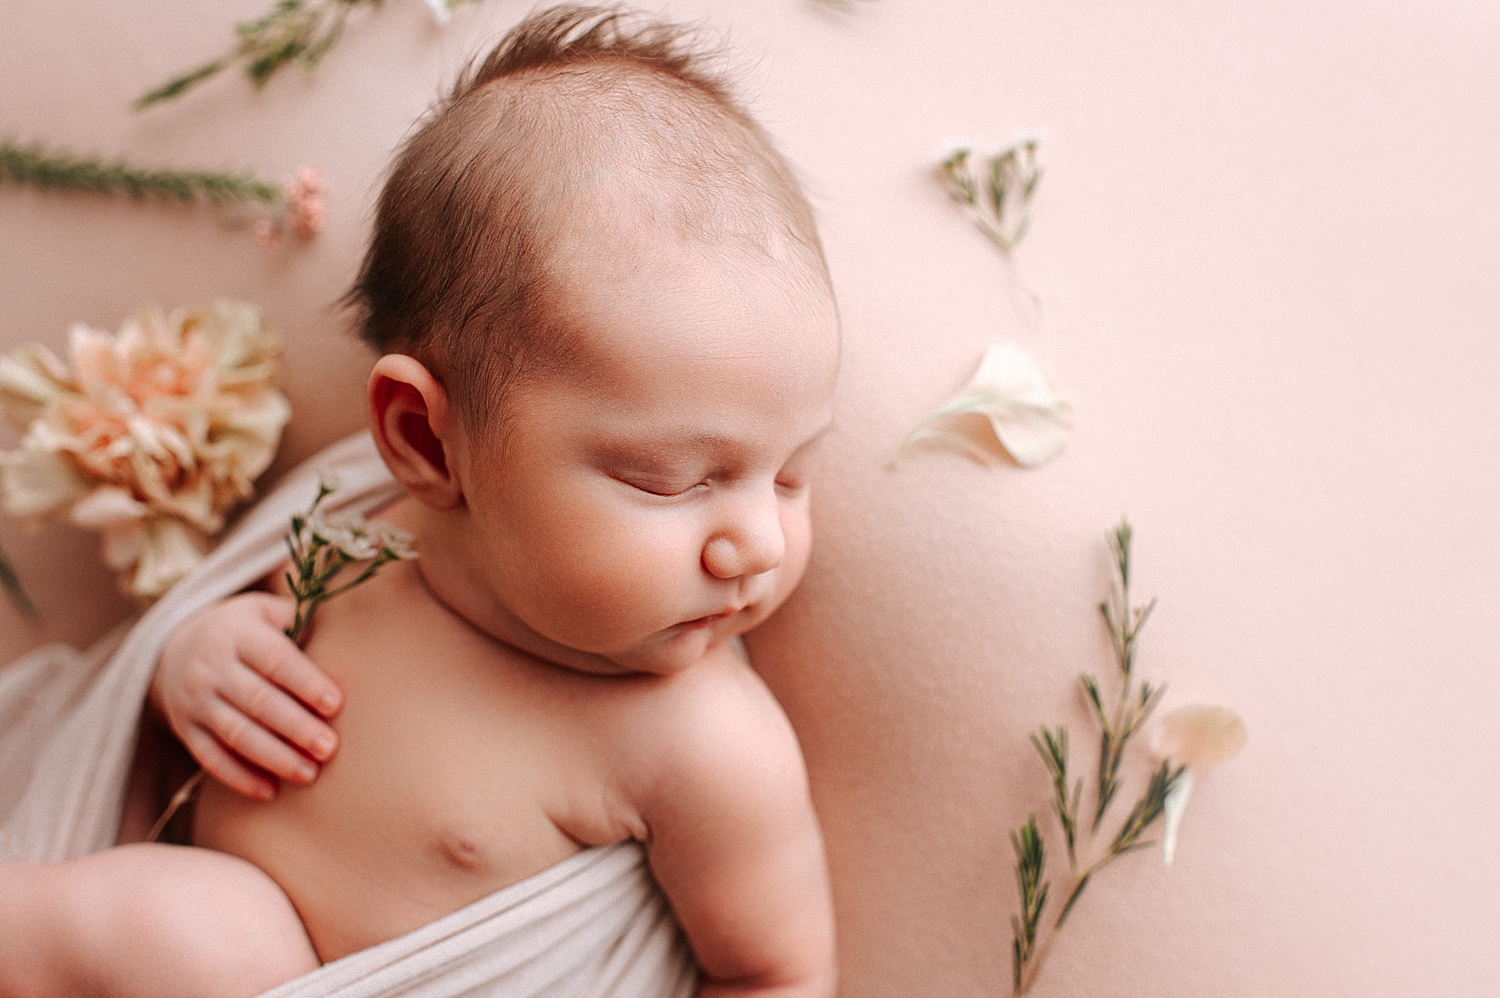 Newborn baby girl with flowers during newborn session | Meg Newton Photography